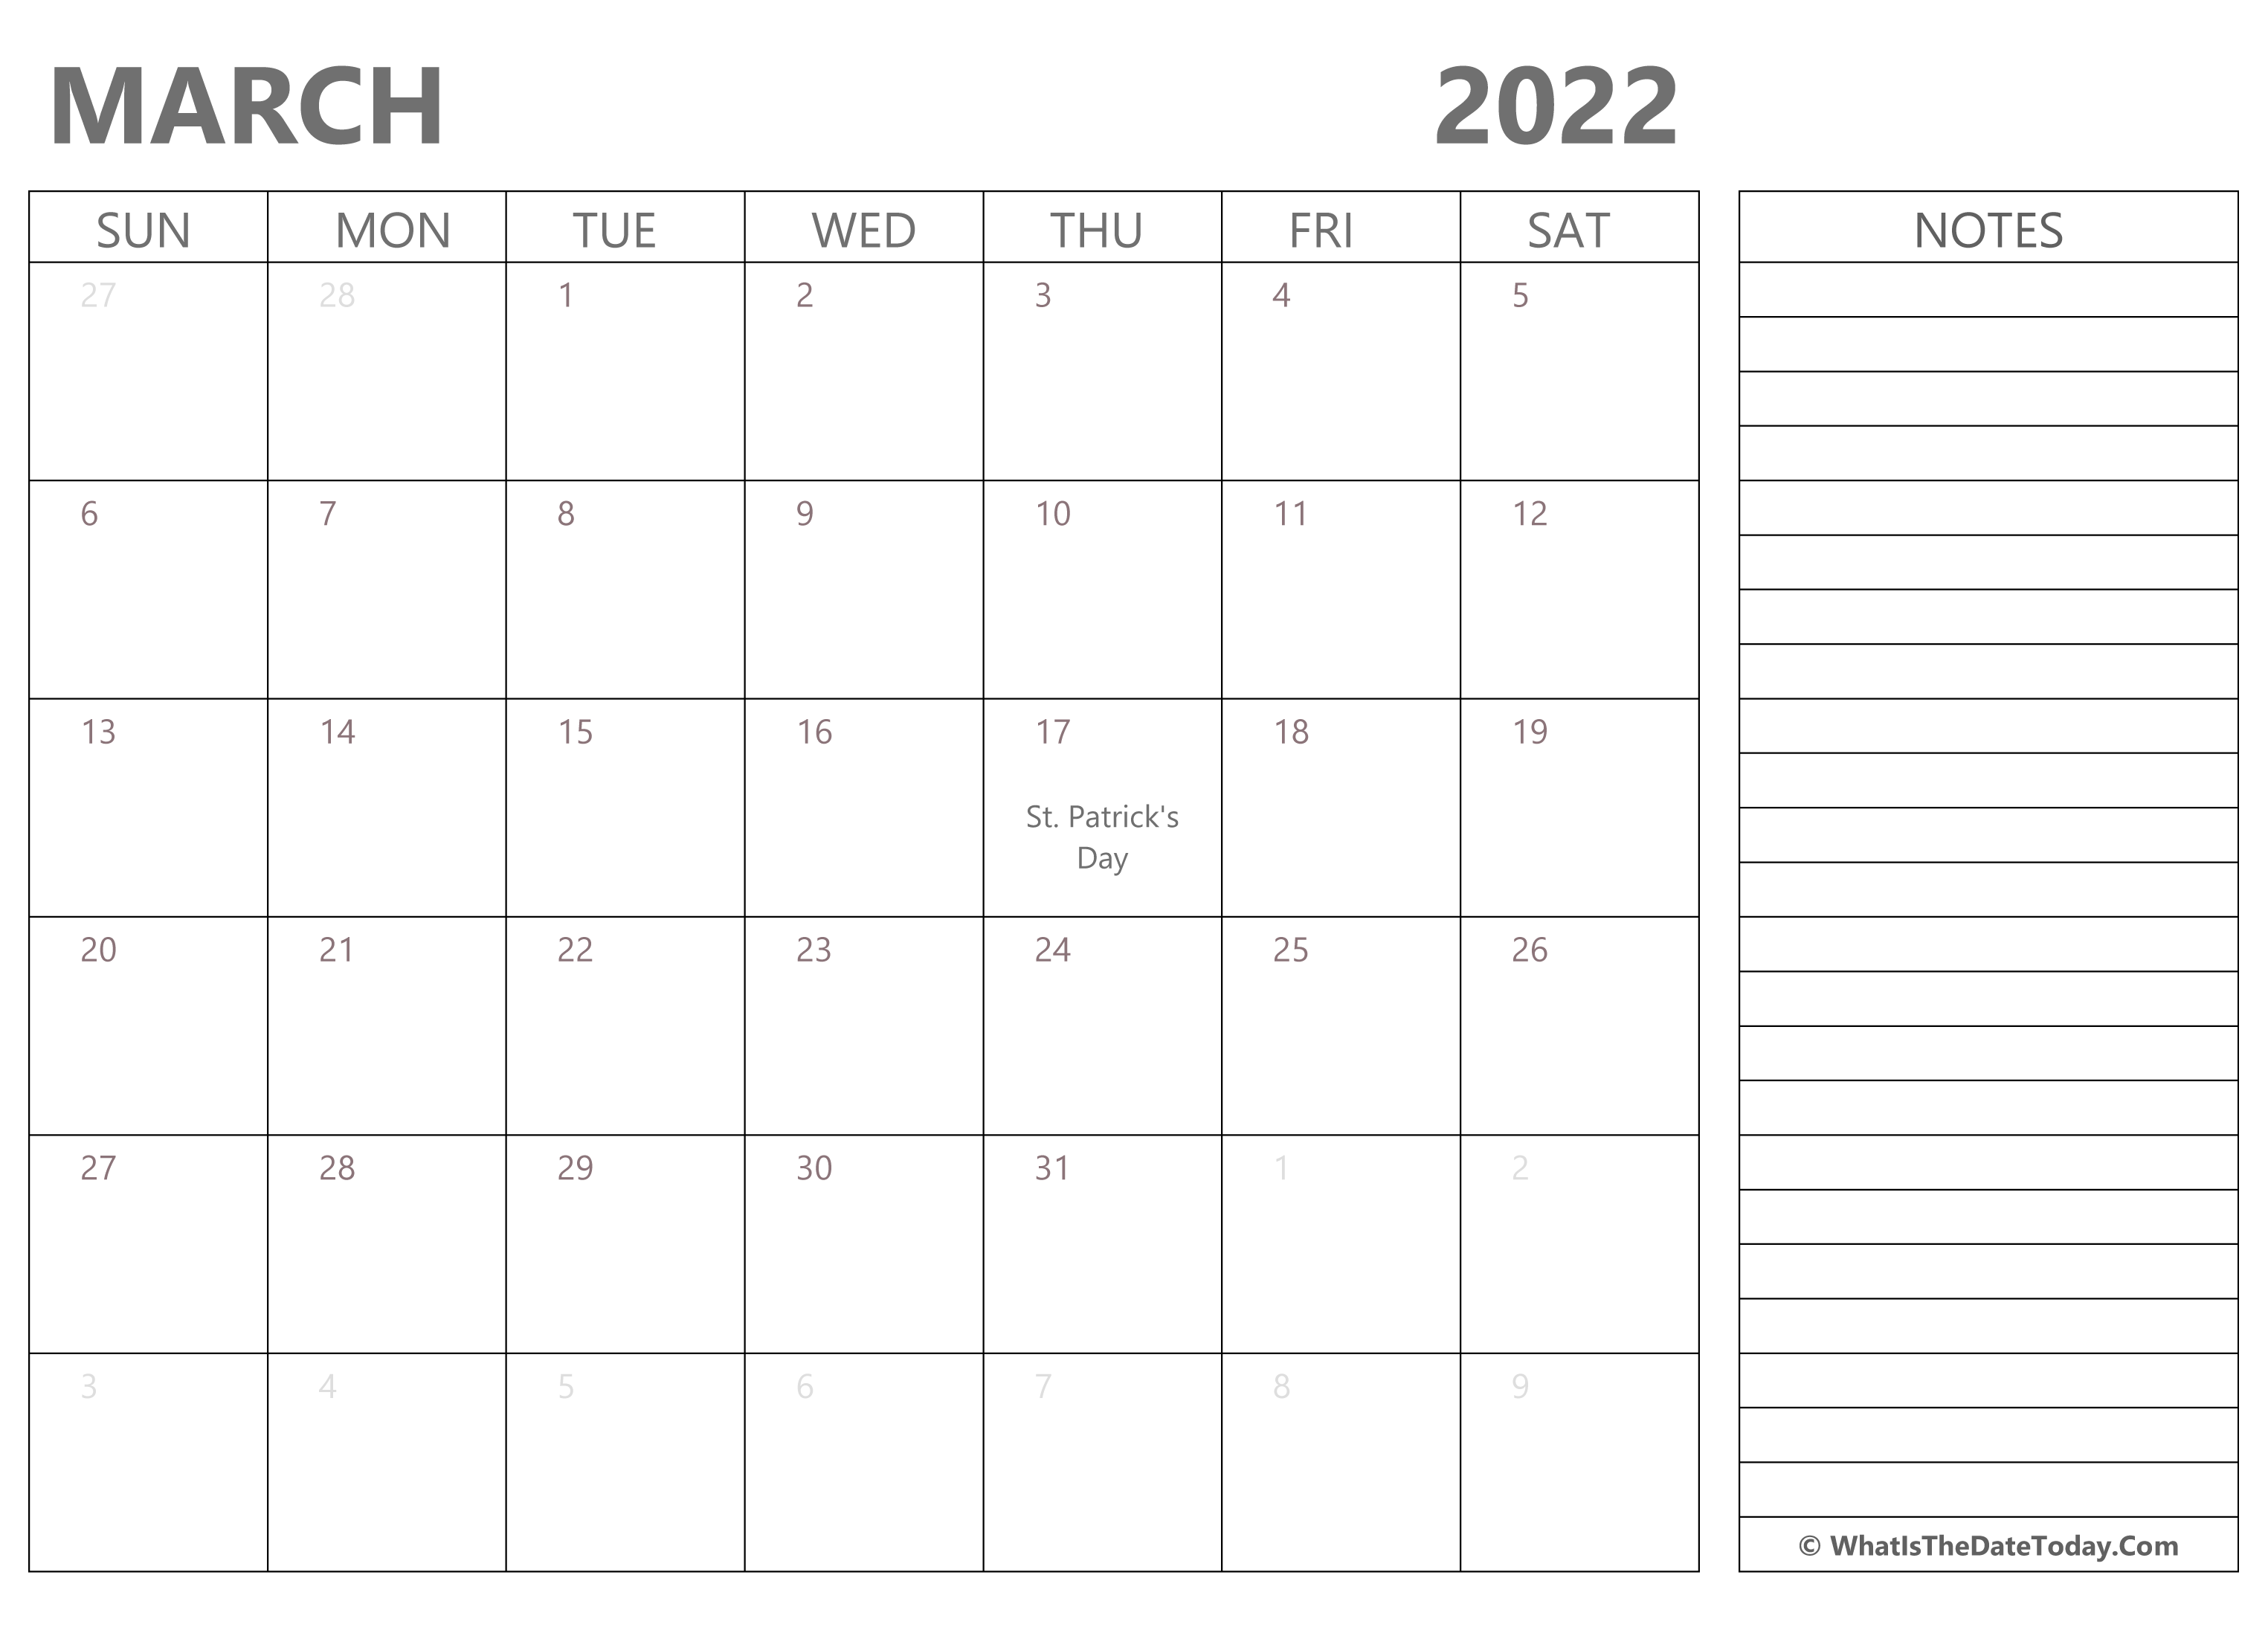 March 2022 Calendar Editable Editable March 2022 Calendar With Holidays And Notes |  Whatisthedatetoday.com